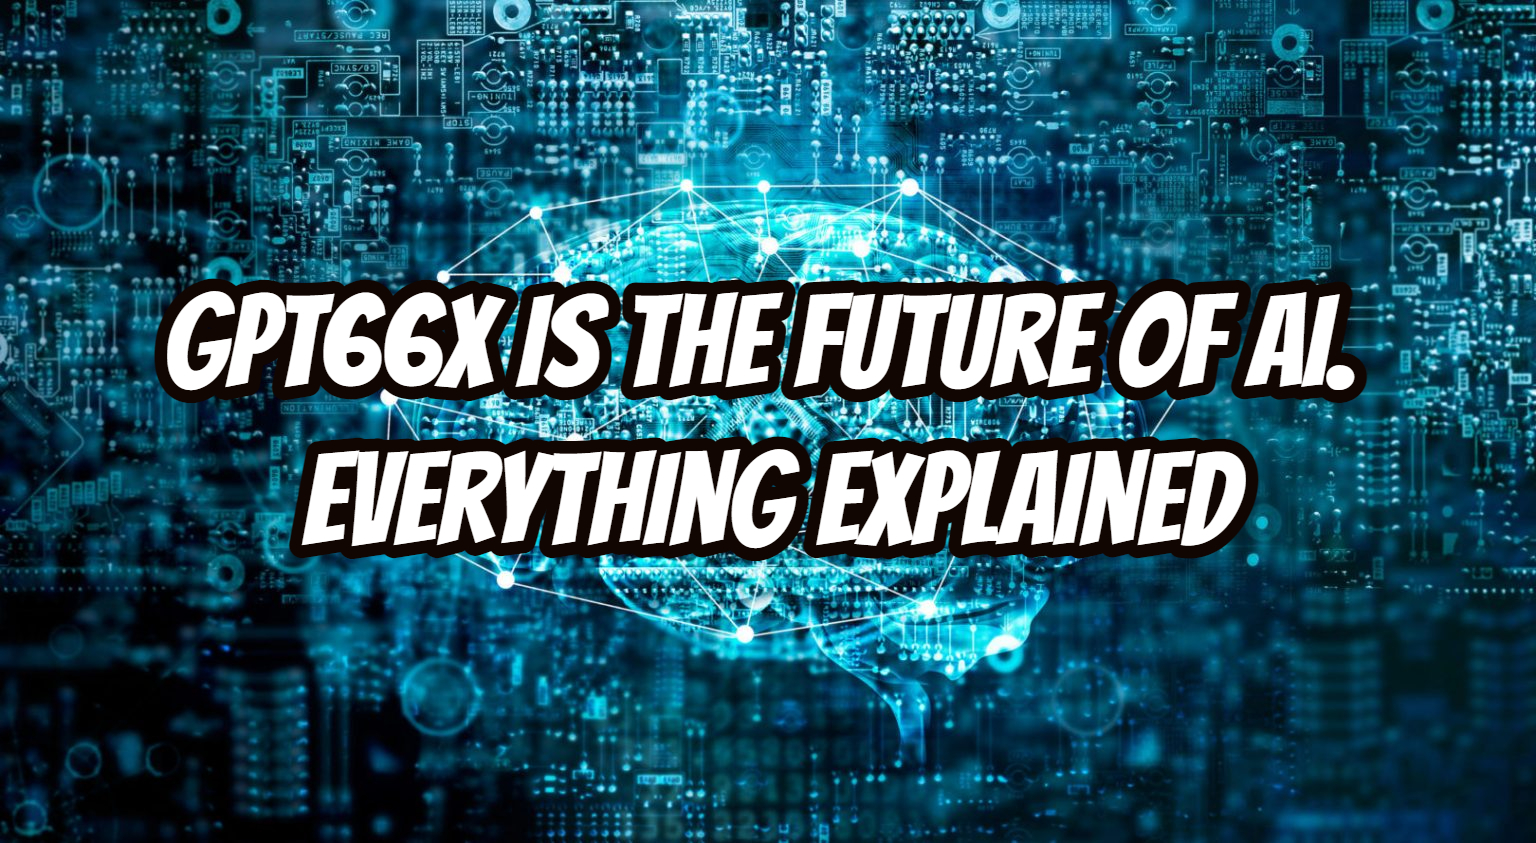 Gpt66x is the Future of AI. Everything Explained